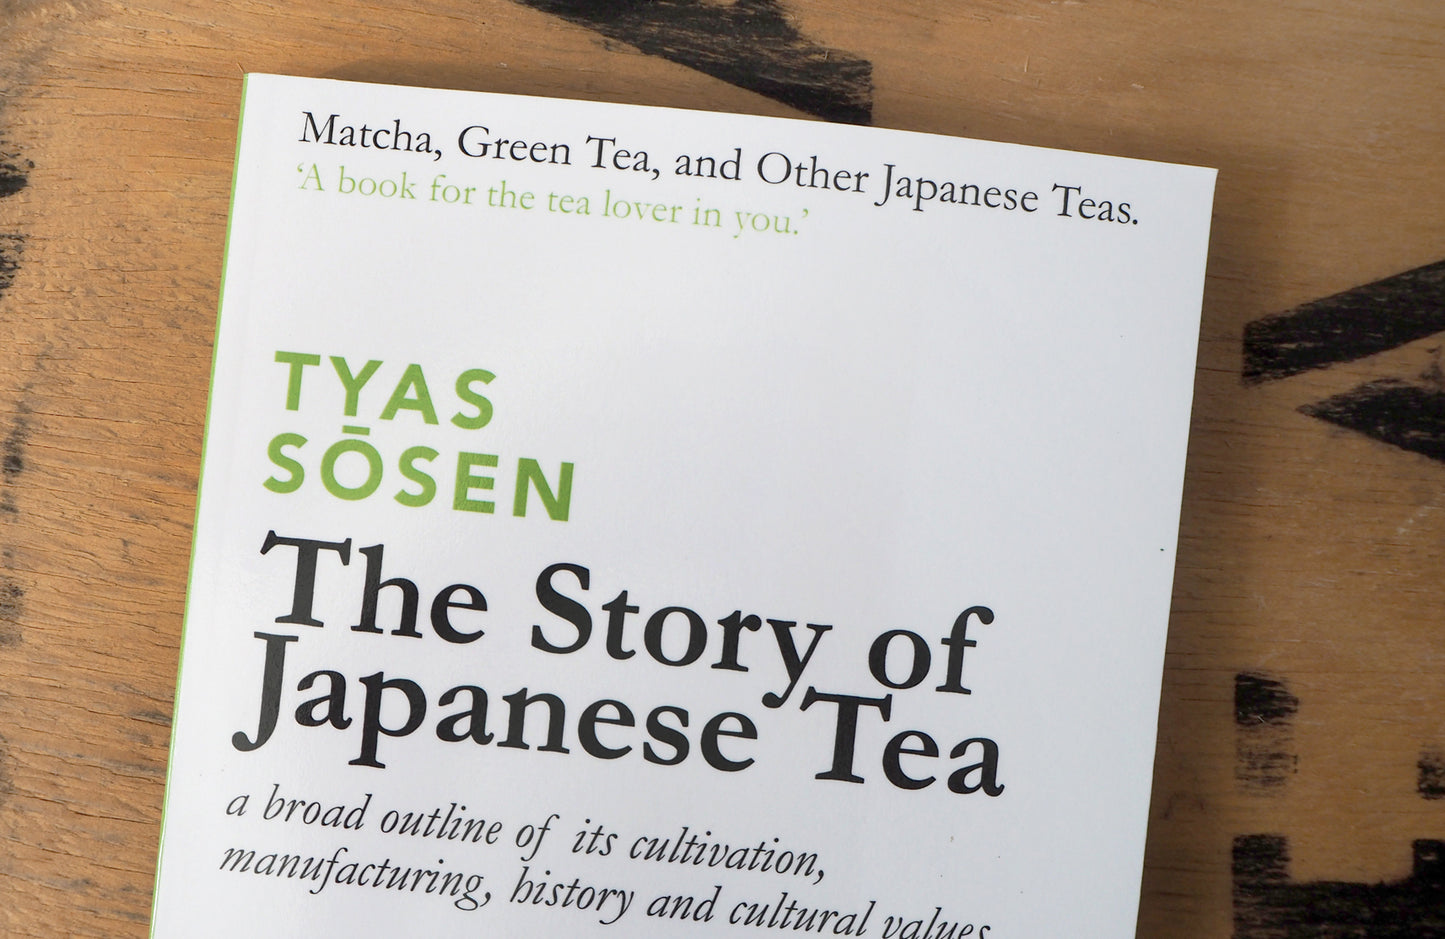 The Story of Japanese Tea by Tyas Sōsen